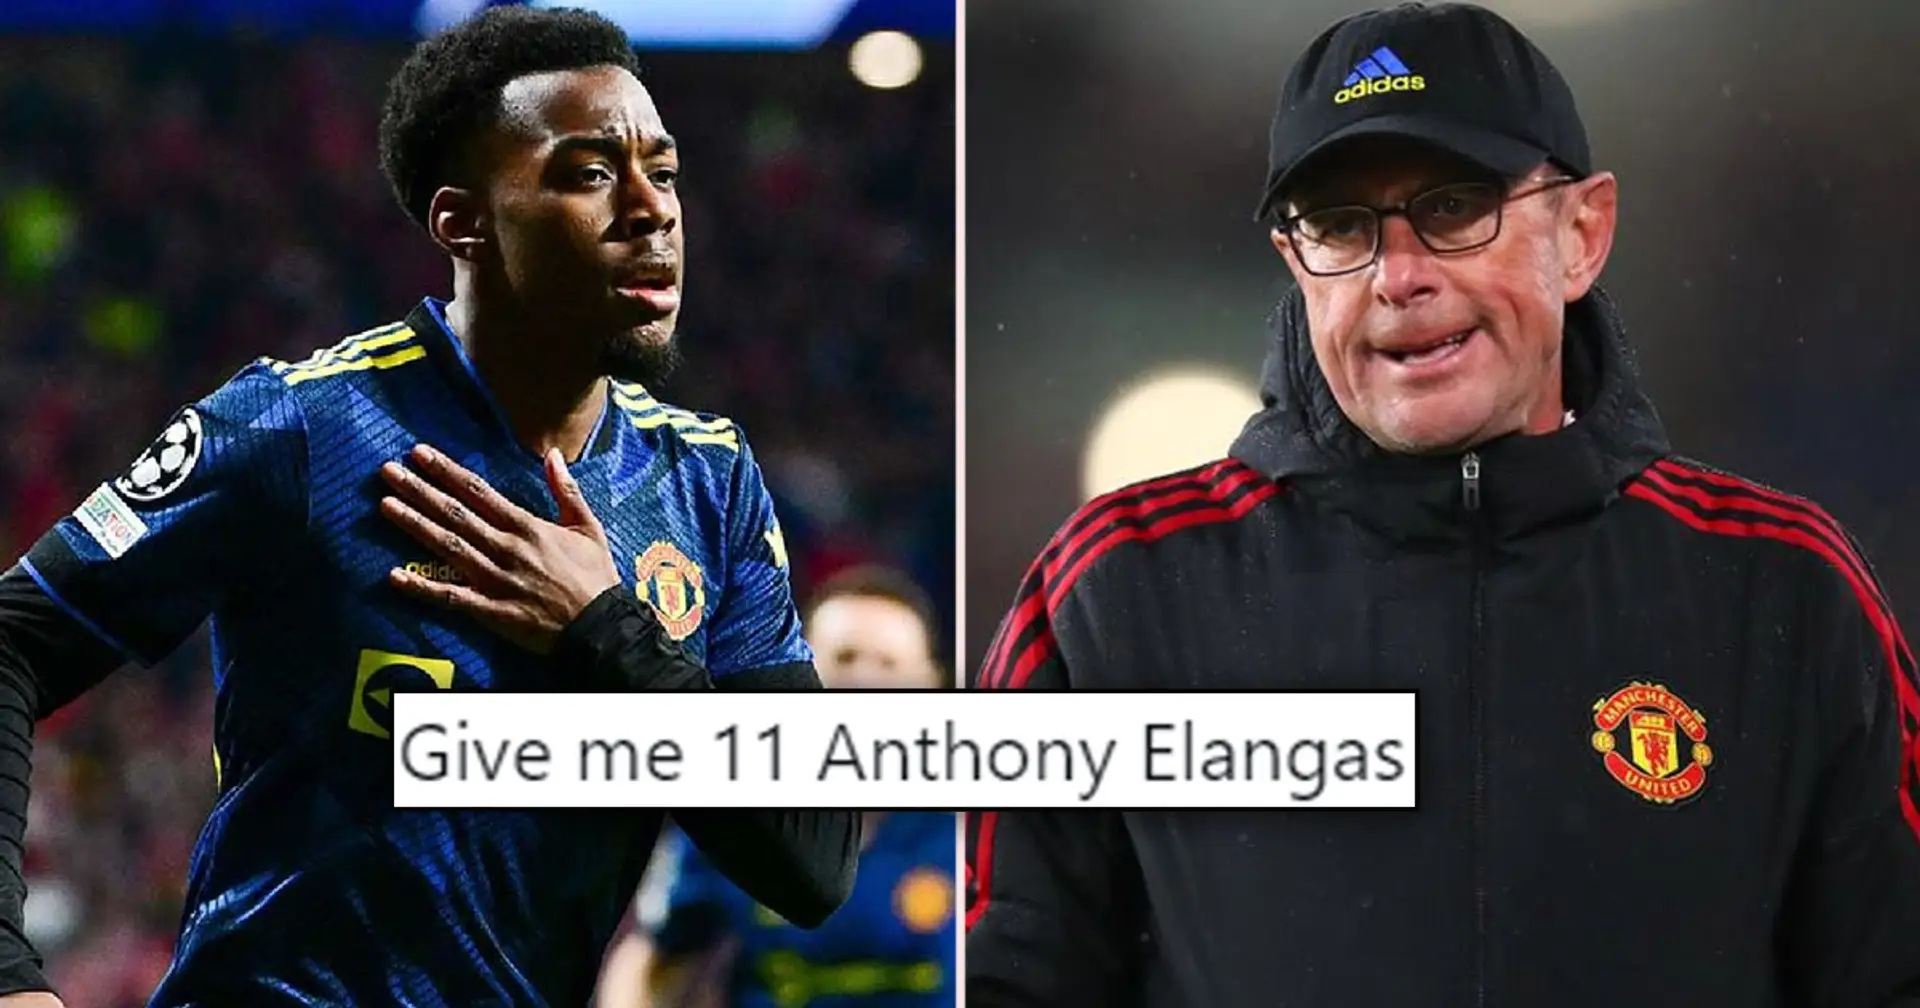 'Give me 11 Elangas and I'll bring you a league title': Fan hails Anthony after Rangnick urges players to treat him as role model